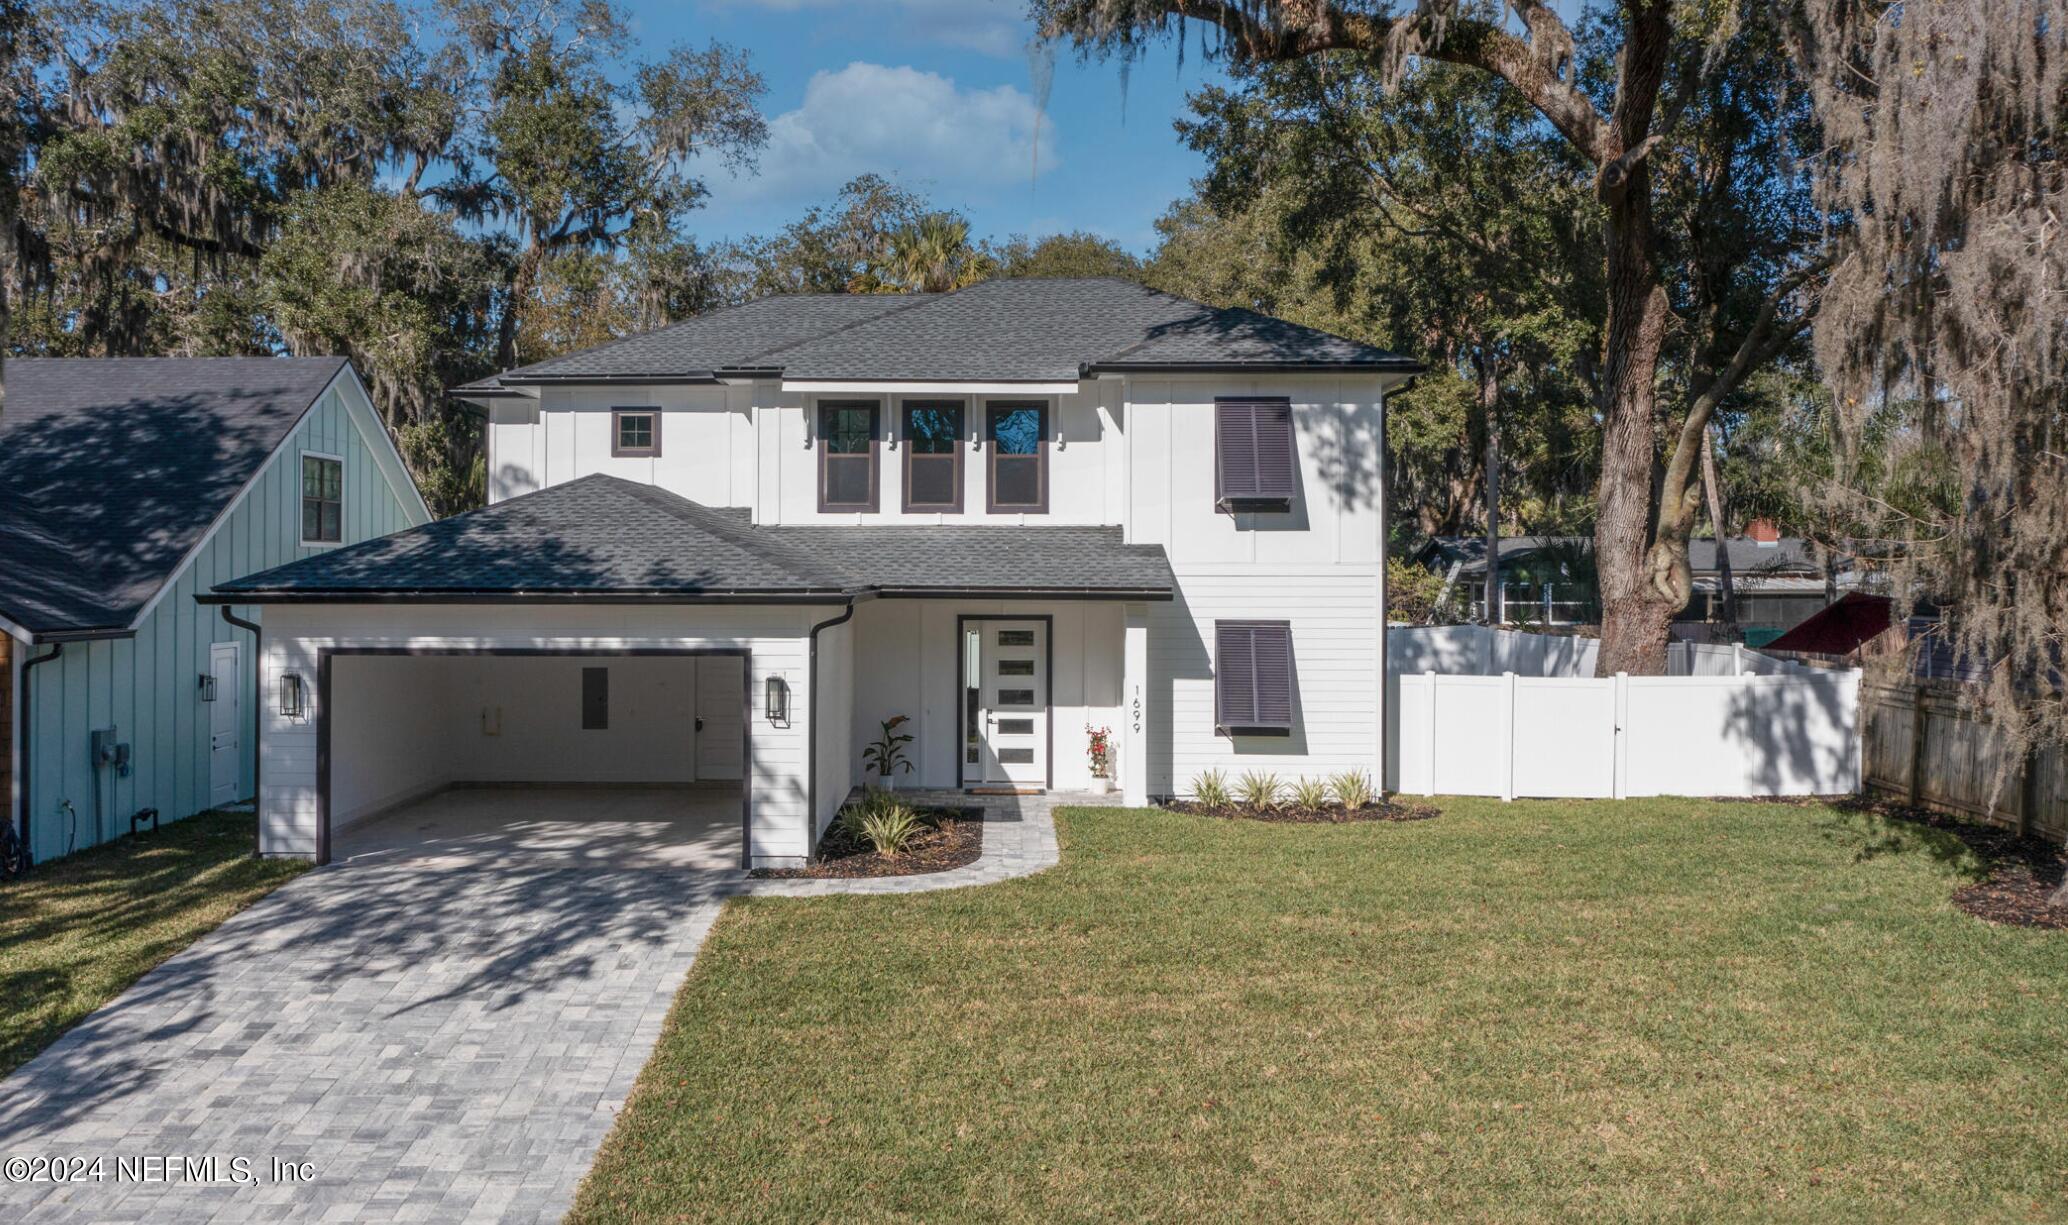 Jacksonville Beach, FL home for sale located at 1013 8TH Avenue N, Jacksonville Beach, FL 32250